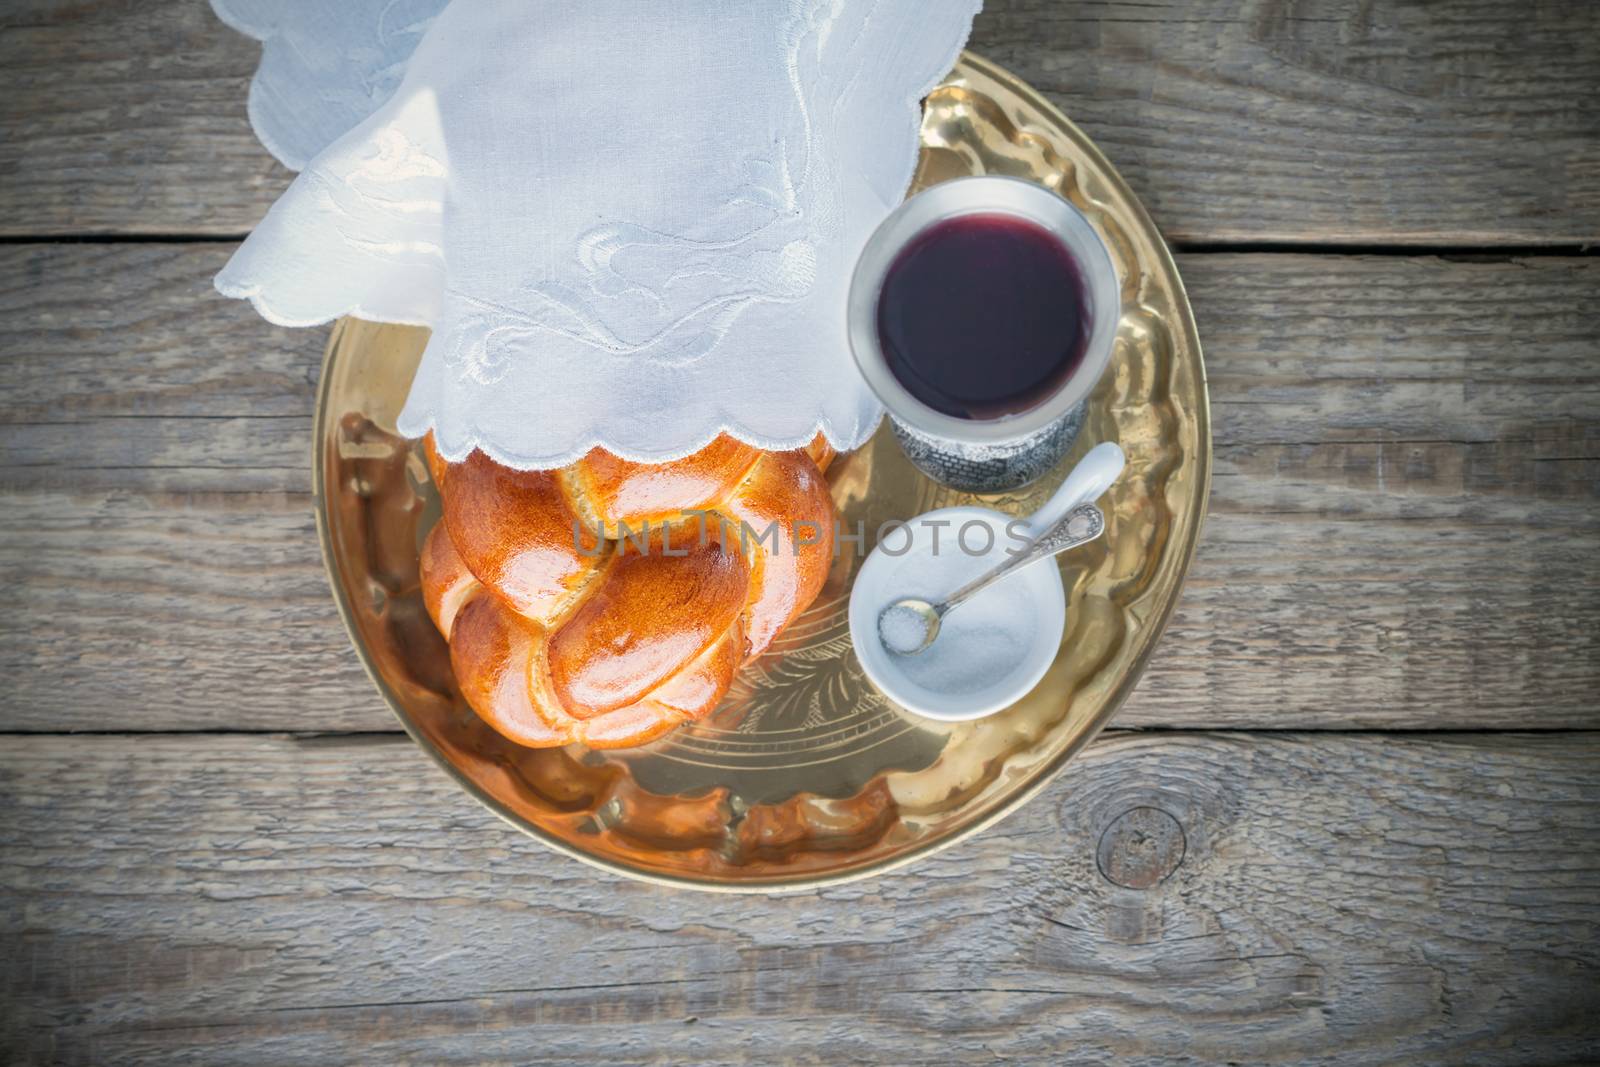 Wine, challah on a wooden surface by supercat67